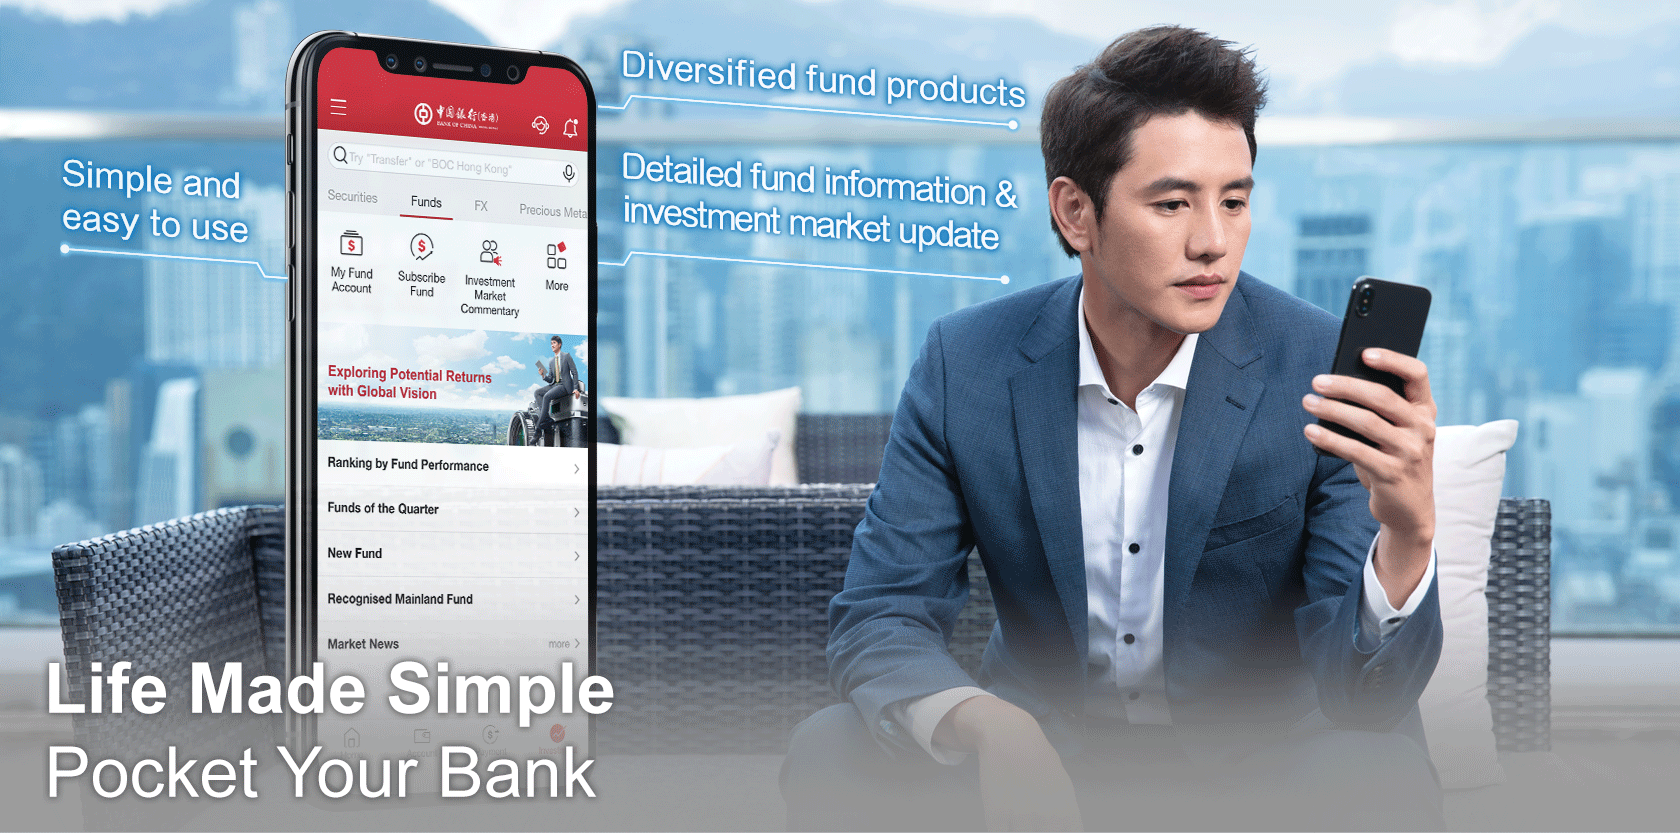 Life Made Simple Pocket Your Bank
Choose from a wide selection of investment funds with just one click